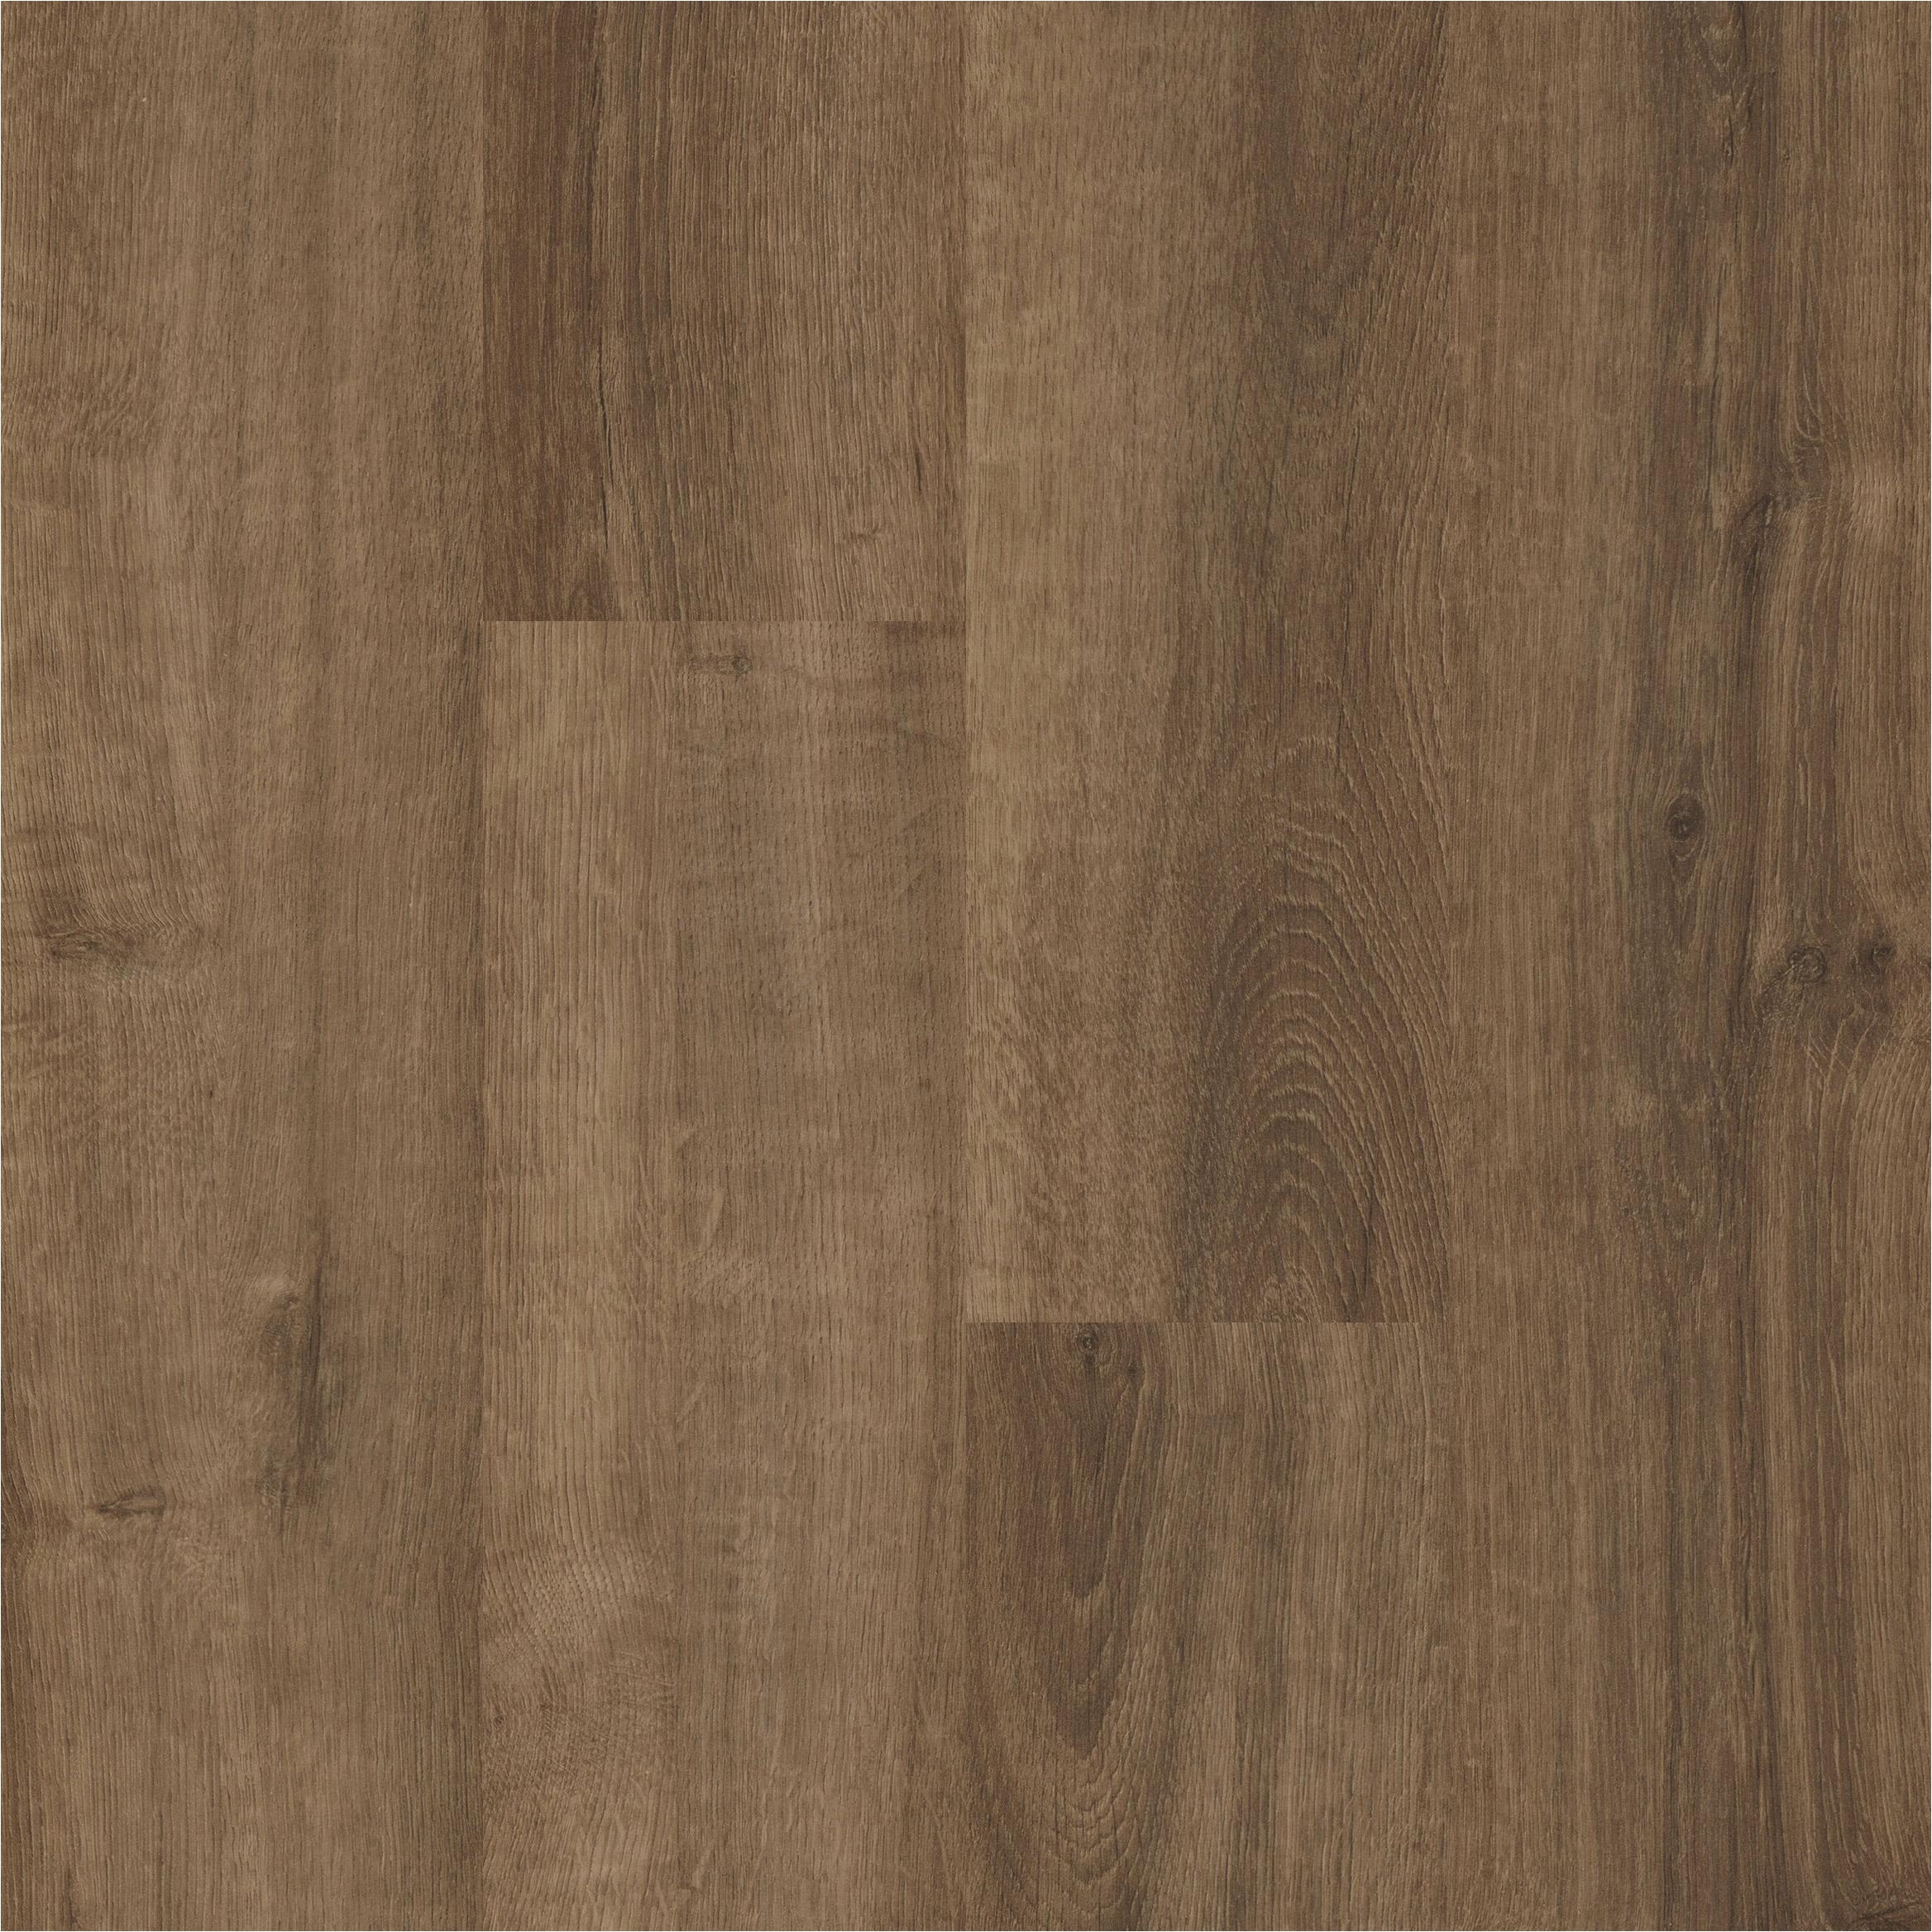 Click together Floating Vinyl Plank Flooring Ivc Moduleo Horizon Distressed Stagecoach Hickory 6 Waterproof